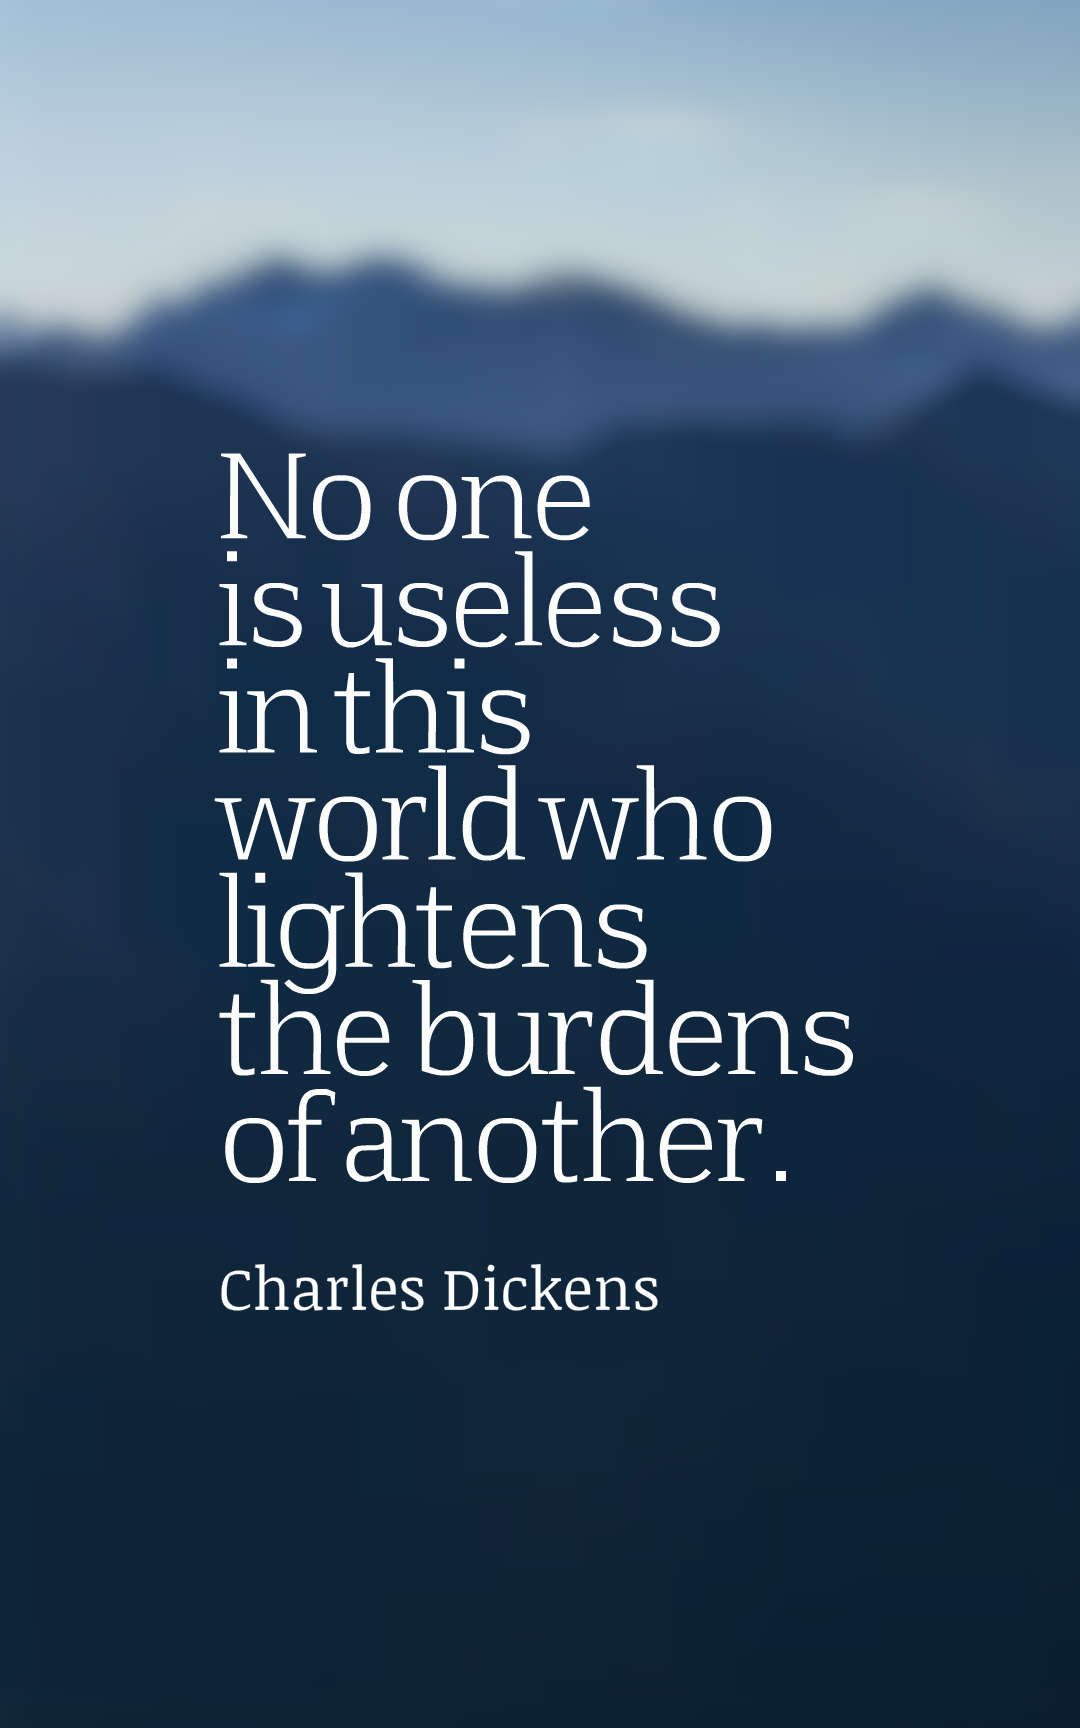 No one is useless in this world who lightens the burdens of another.